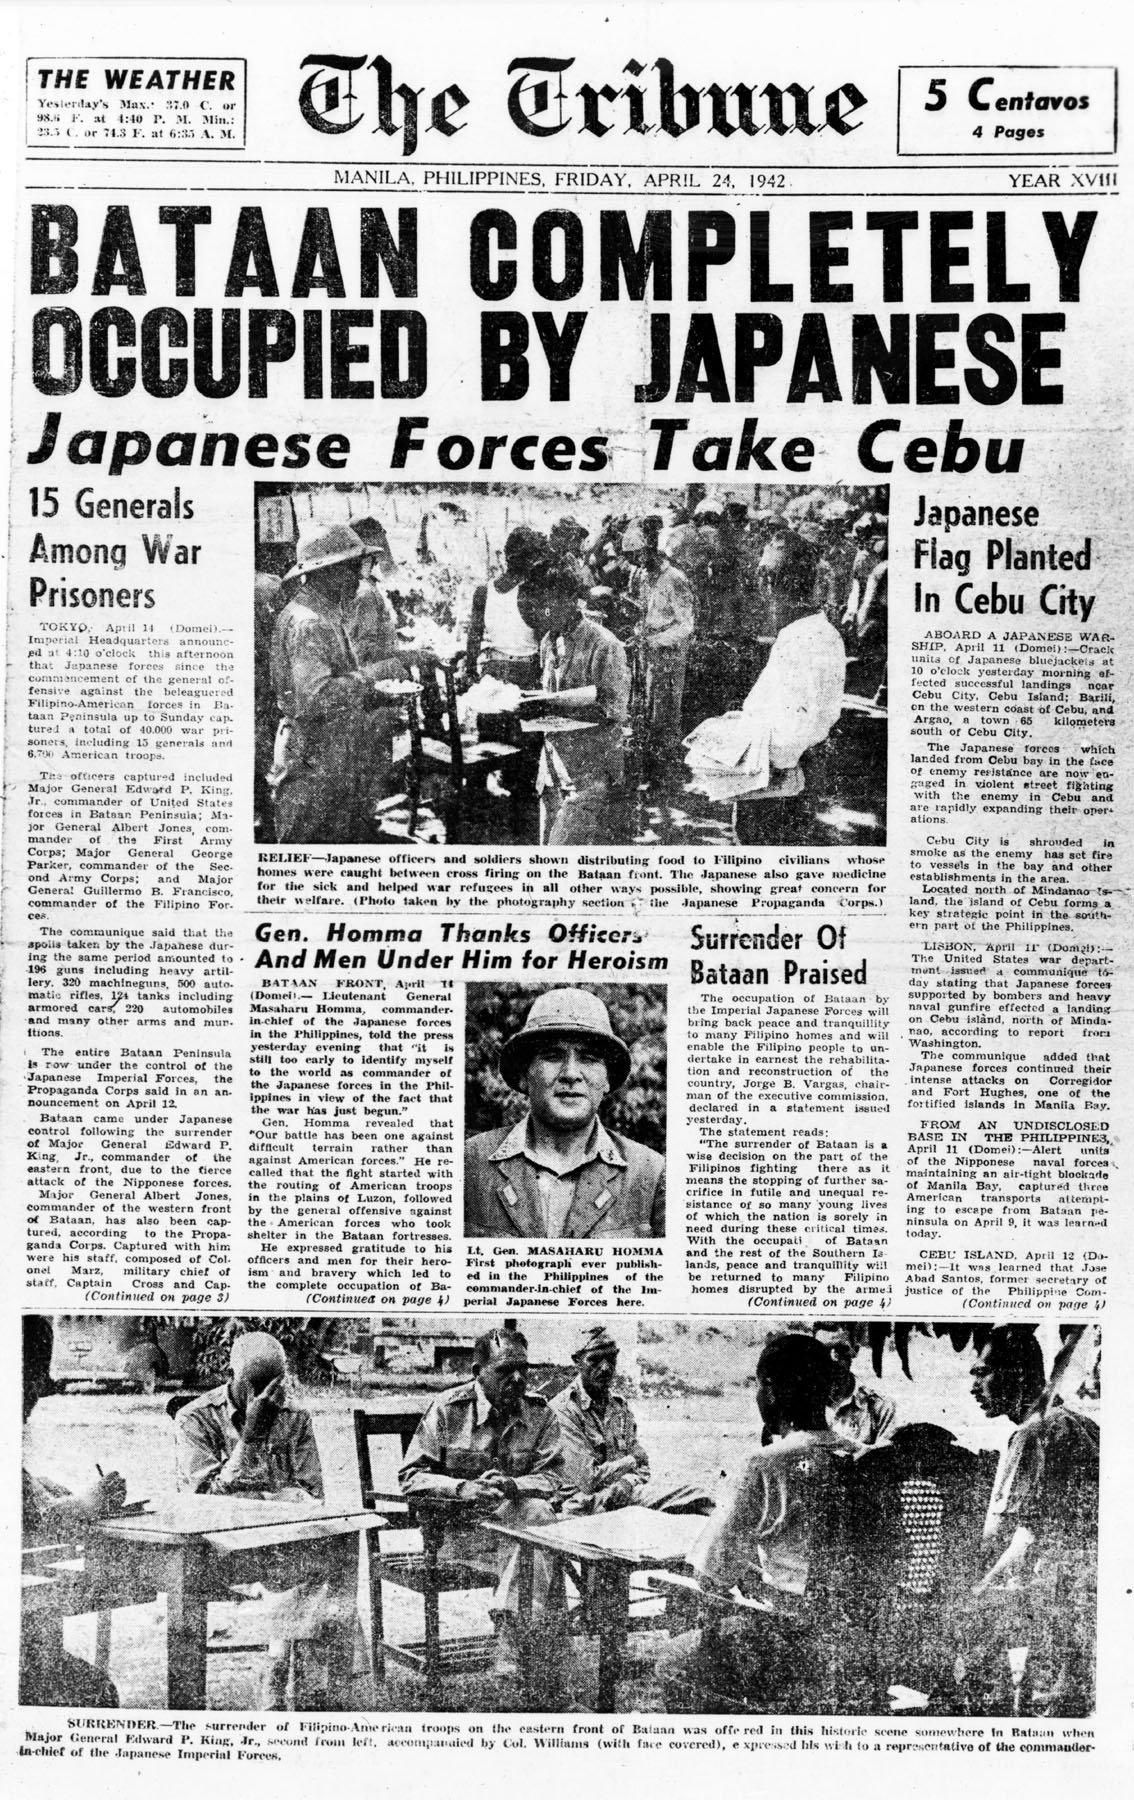 Original The Tribune Front Page  Manila, Philippines - Friday, April 24, 1942 - "Bataan Completely Occupied by Japanese"